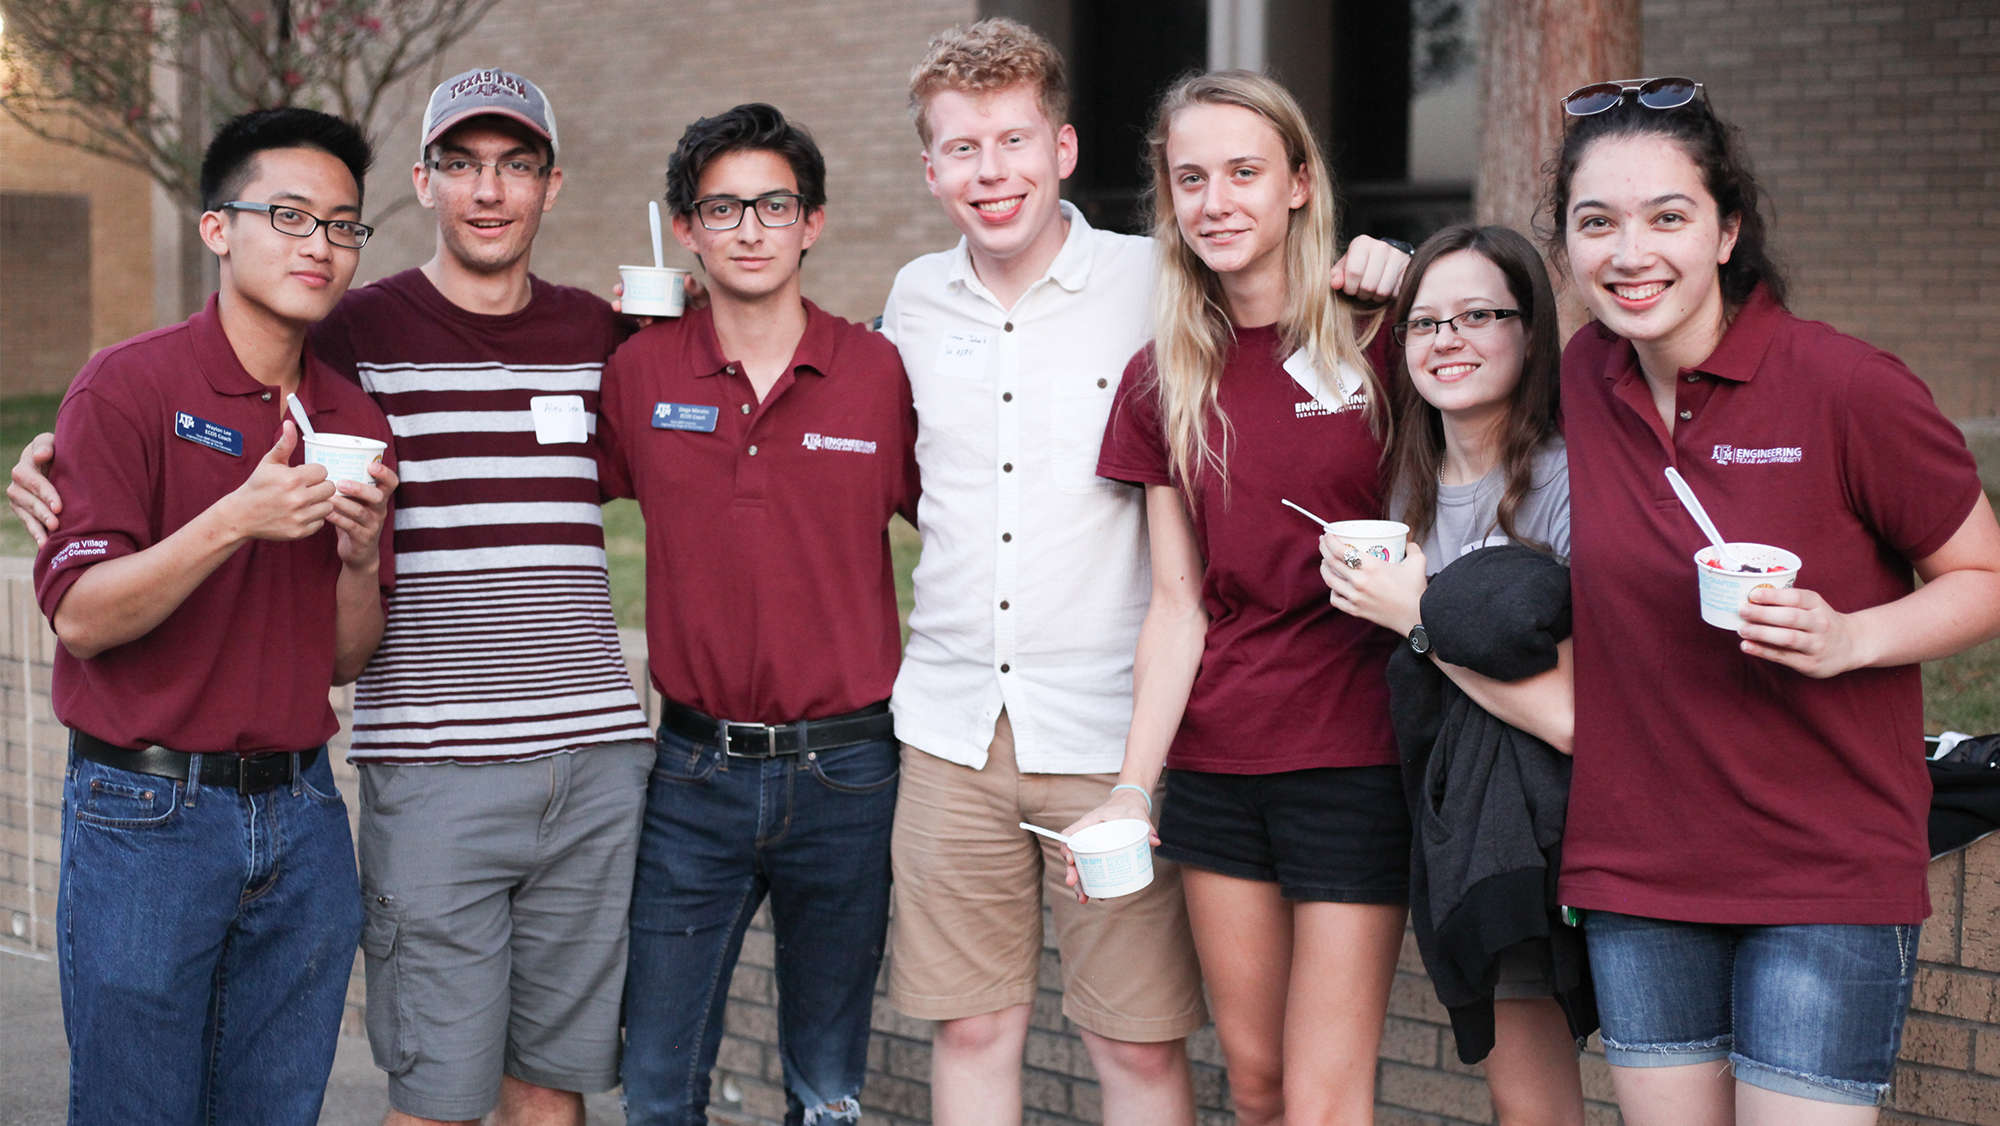 Students pose for a picture at the Engineering Honor Community of Scholars Ice Cream Social